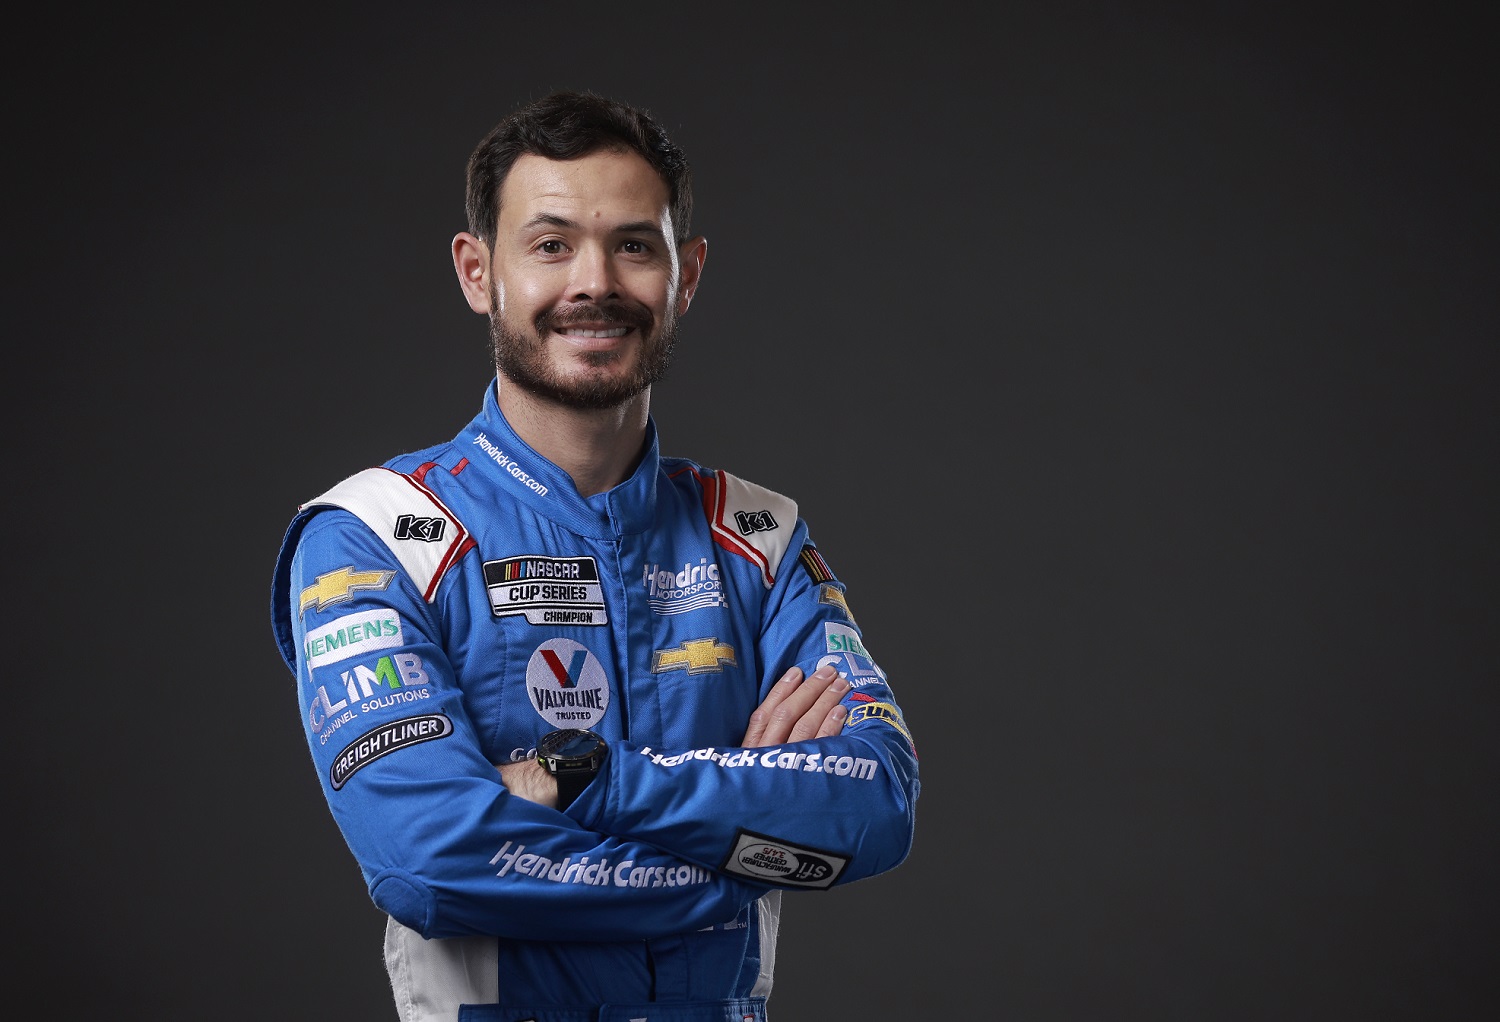 NASCAR driver Kyle Larson poses for a photo during NASCAR Production Days at Charlotte Convention Center on Jan. 17, 2023. | Jared C. Tilton/Getty Images